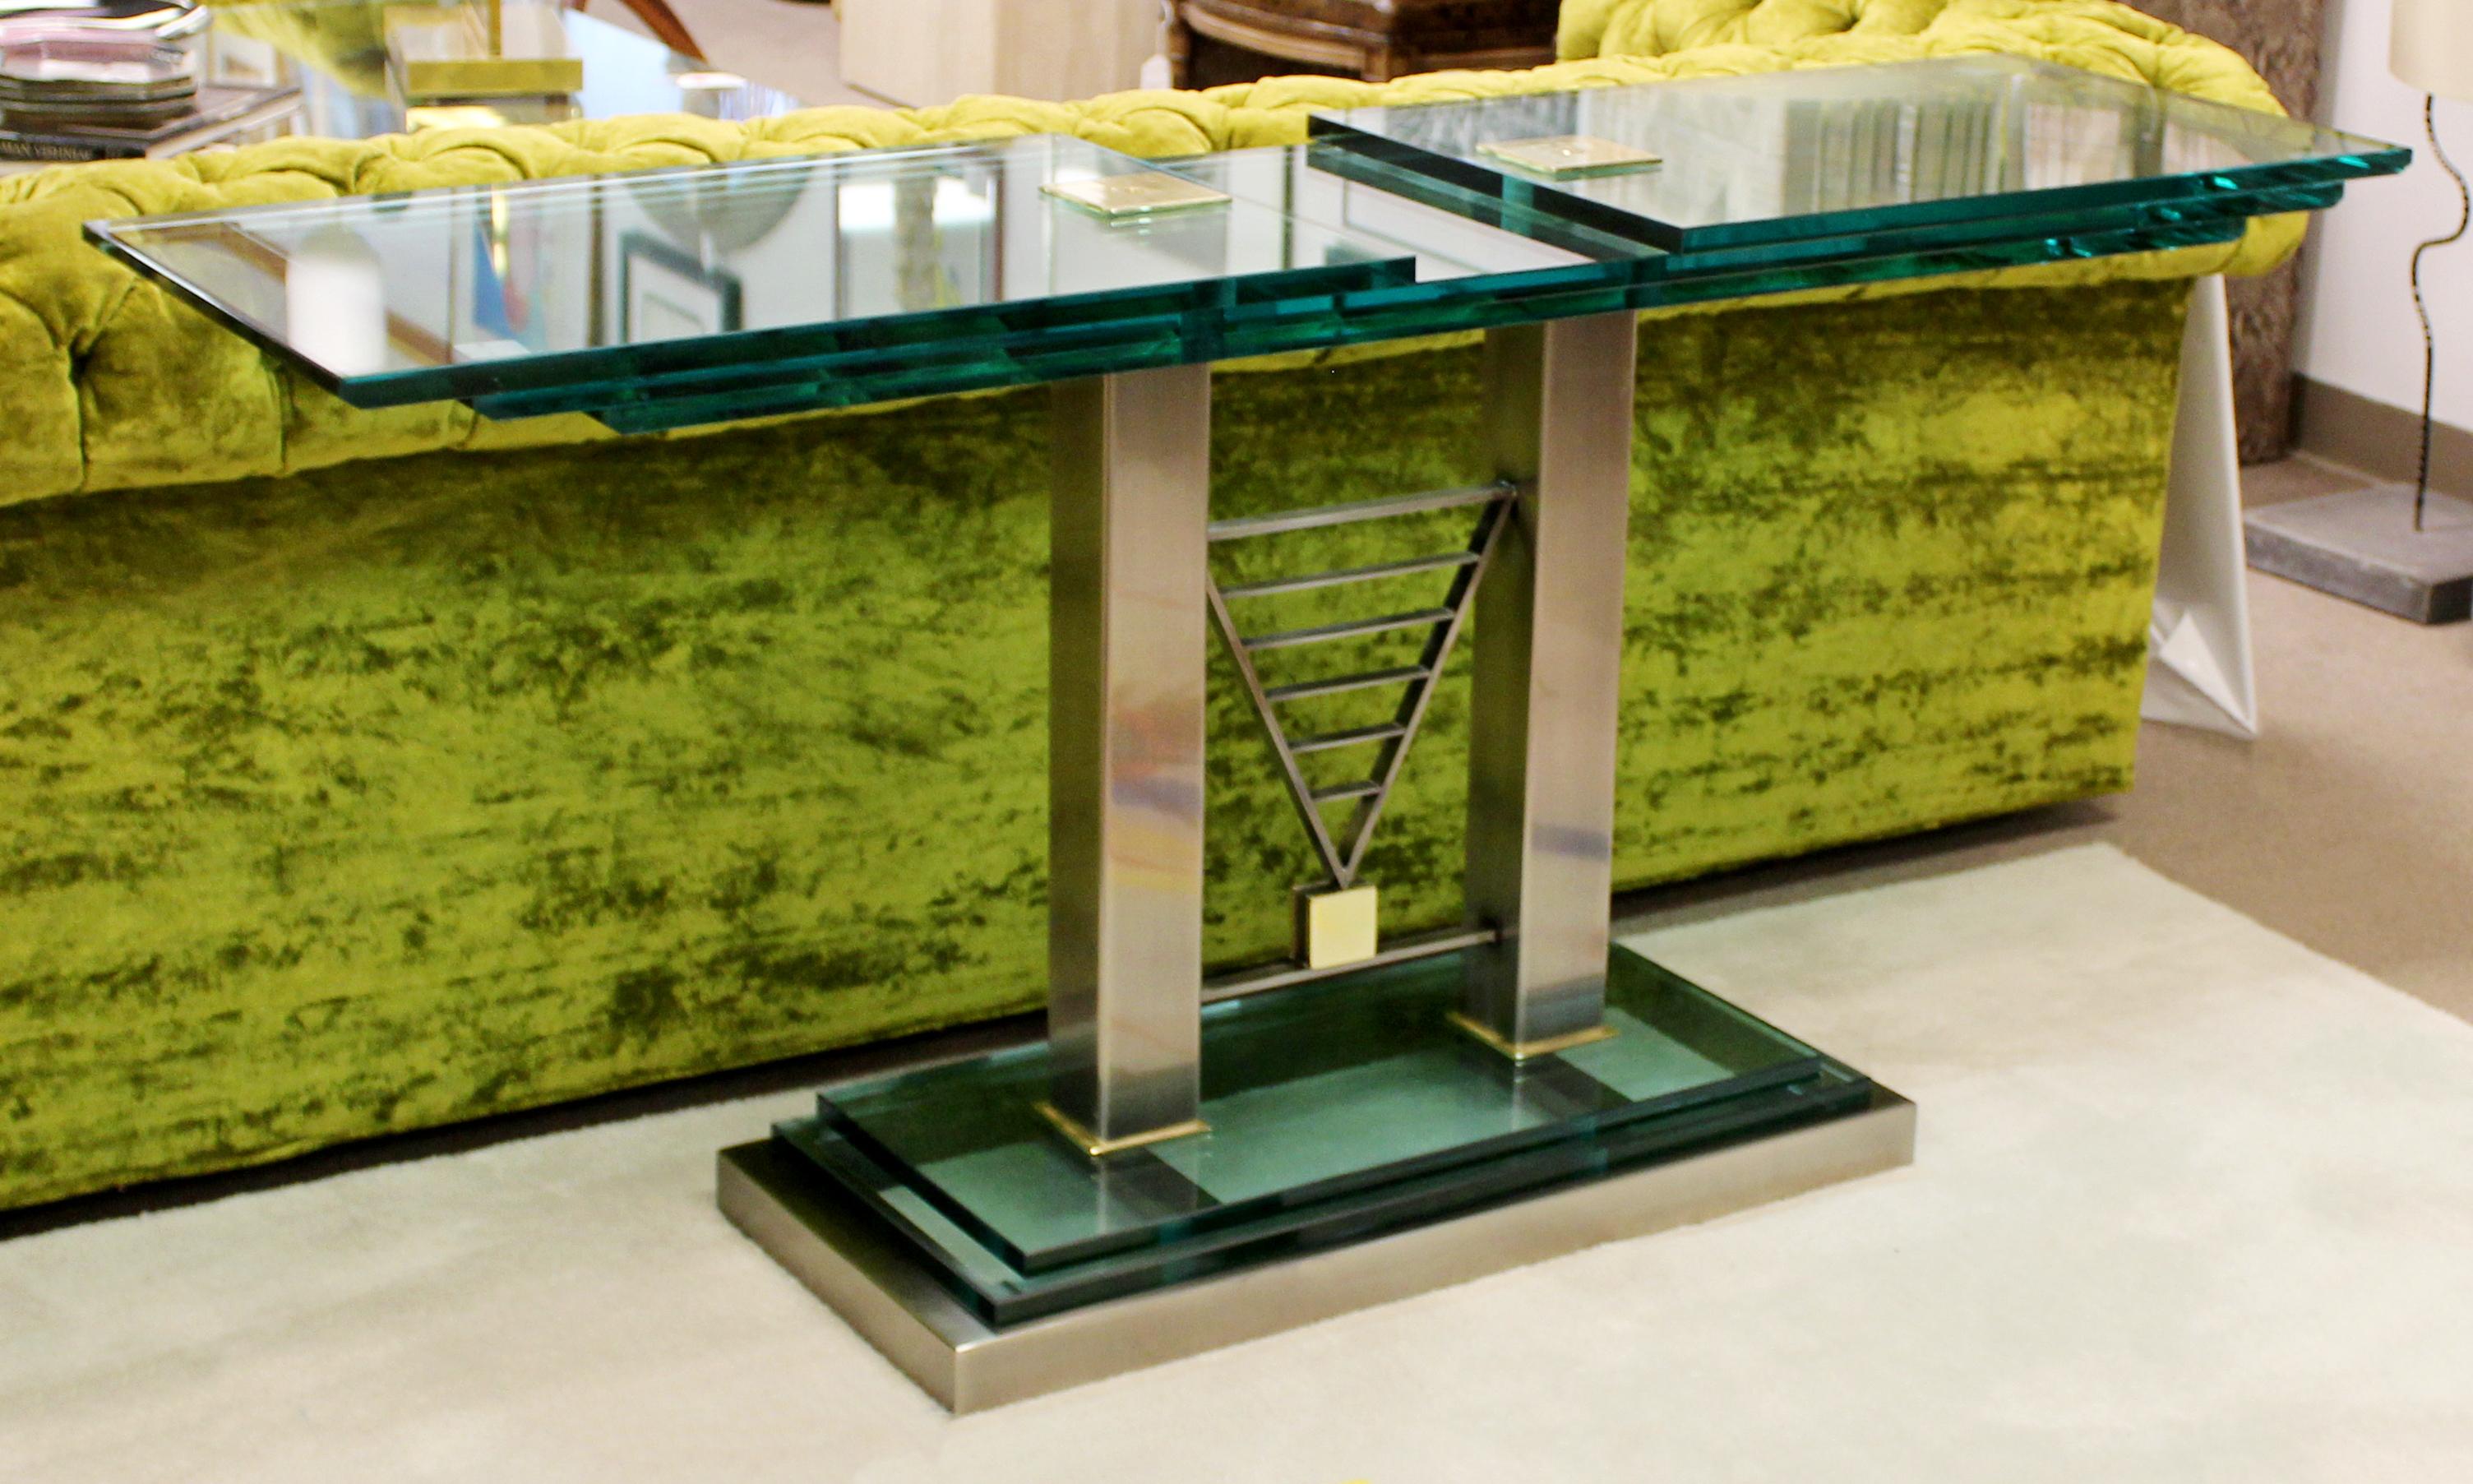 American Art Deco Style Console Table Brass Glass Chrome Steel by DIA Design Institute